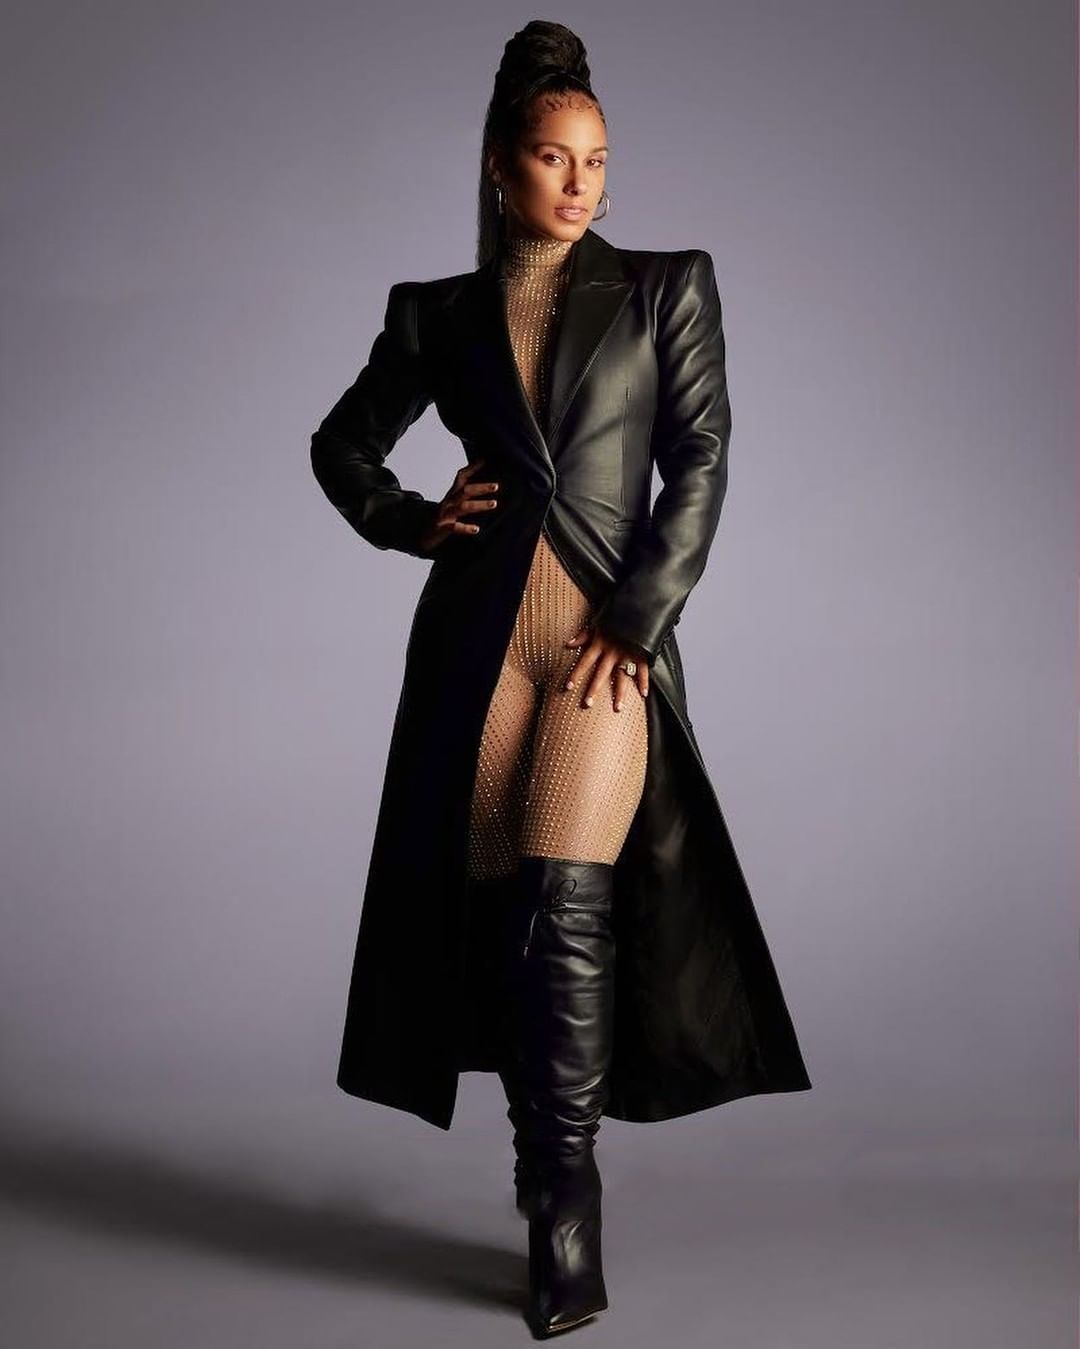 Alicia Keys- Keeping It Unique And Classy